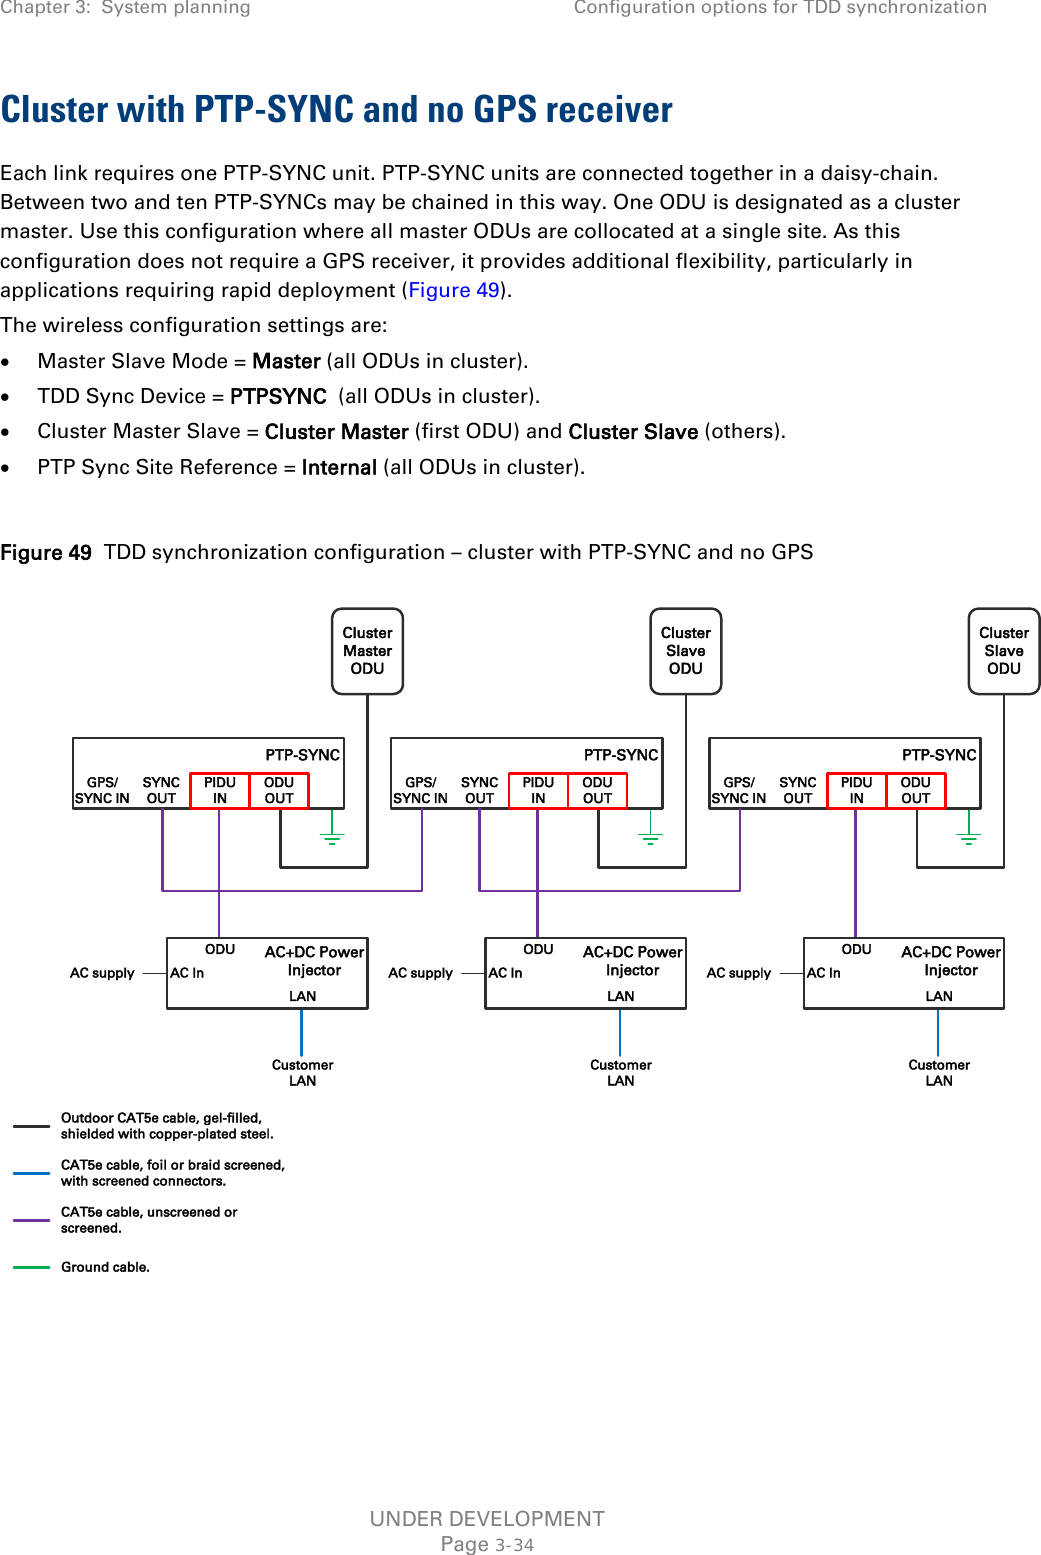 Chapter 3:  System planning Configuration options for TDD synchronization  Cluster with PTP-SYNC and no GPS receiver Each link requires one PTP-SYNC unit. PTP-SYNC units are connected together in a daisy-chain. Between two and ten PTP-SYNCs may be chained in this way. One ODU is designated as a cluster master. Use this configuration where all master ODUs are collocated at a single site. As this configuration does not require a GPS receiver, it provides additional flexibility, particularly in applications requiring rapid deployment (Figure 49). The wireless configuration settings are: • Master Slave Mode = Master (all ODUs in cluster). • TDD Sync Device = PTPSYNC  (all ODUs in cluster). • Cluster Master Slave = Cluster Master (first ODU) and Cluster Slave (others). • PTP Sync Site Reference = Internal (all ODUs in cluster).  Figure 49  TDD synchronization configuration – cluster with PTP-SYNC and no GPS     ClusterMasterODUPTP-SYNCGPS/SYNC INSYNCOUTPIDUINODUOUTODULANAC+DC PowerInjectorAC InCustomerLANAC supplyOutdoor CAT5e cable, gel-filled, shielded with copper-plated steel.CAT5e cable, foil or braid screened, with screened connectors.CAT5e cable, unscreened or screened.Ground cable.ClusterSlaveODUPTP-SYNCGPS/SYNC INSYNCOUTPIDUINODUOUTODULANAC+DC PowerInjectorAC InCustomerLANAC supplyClusterSlaveODUPTP-SYNCGPS/SYNC INSYNCOUTPIDUINODUOUTODULANAC+DC PowerInjectorAC InCustomerLANAC supplyUNDER DEVELOPMENT Page 3-34 